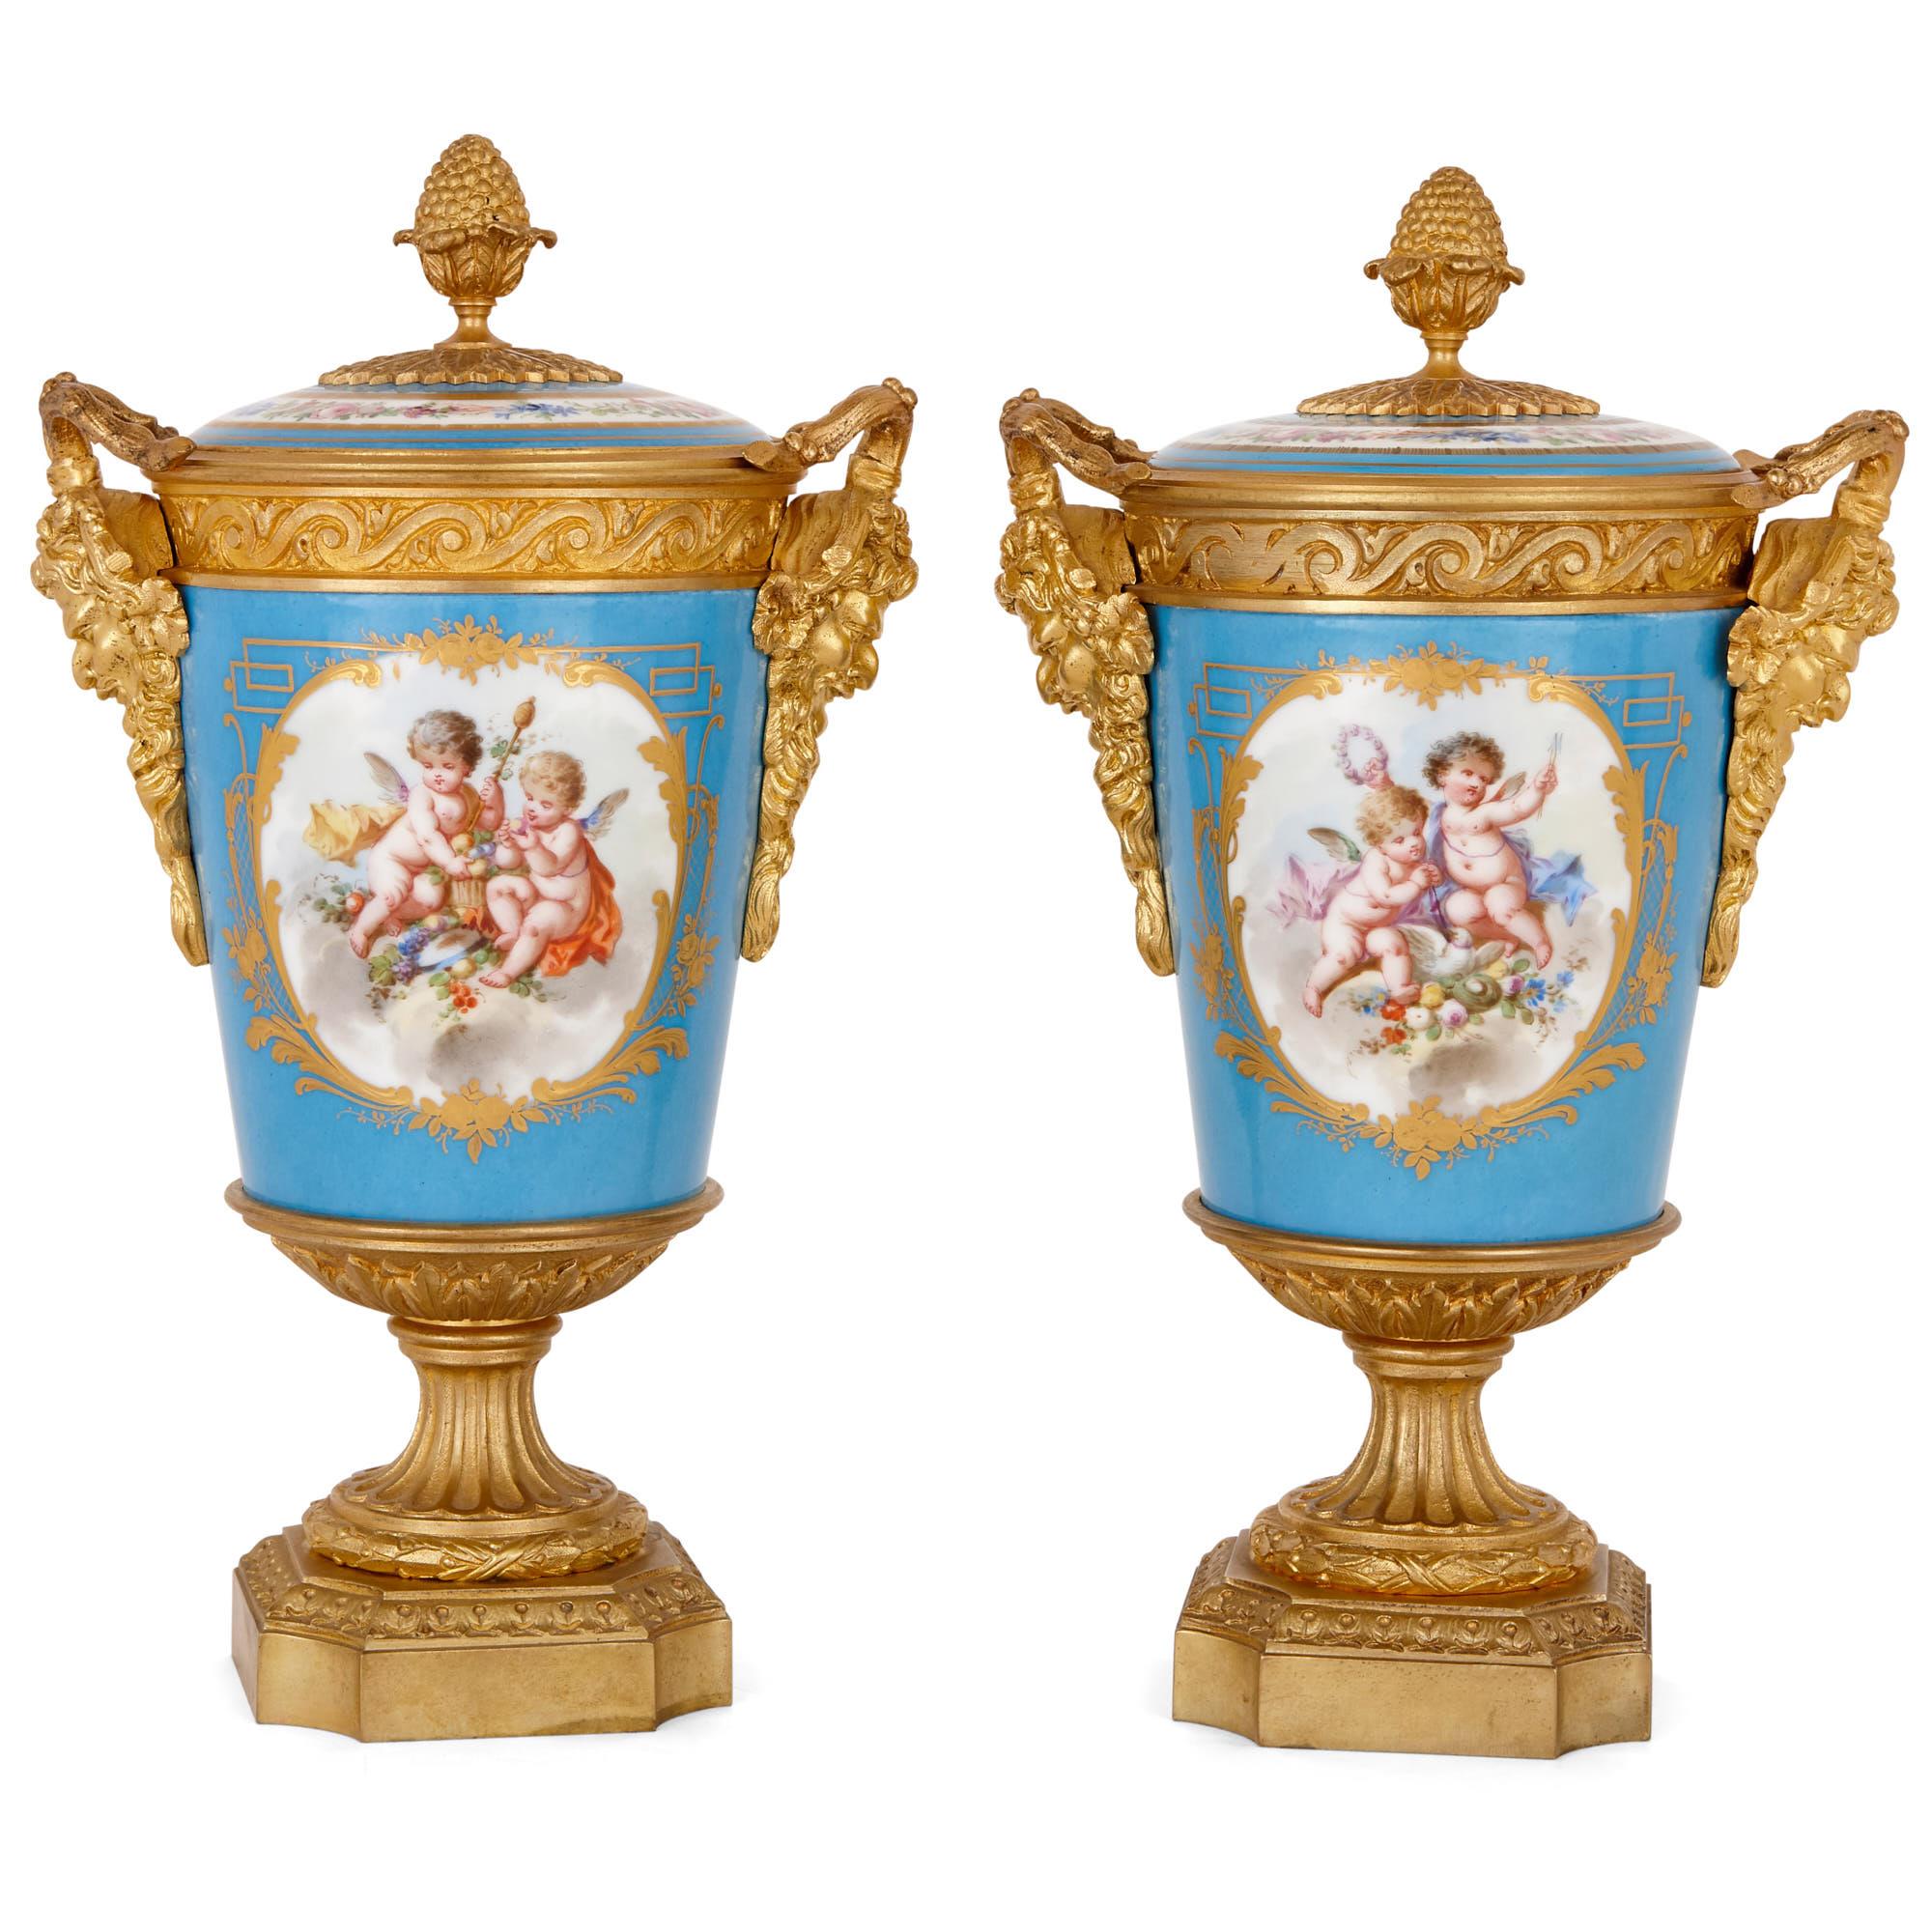 These beautiful porcelain vases feature elegant Rococo-style decorations in the manner of the Sèvres manufactures. 

The vases feature slightly flared cylindrical porcelain bodies which are topped by shallow domed porcelain lids. The lids are